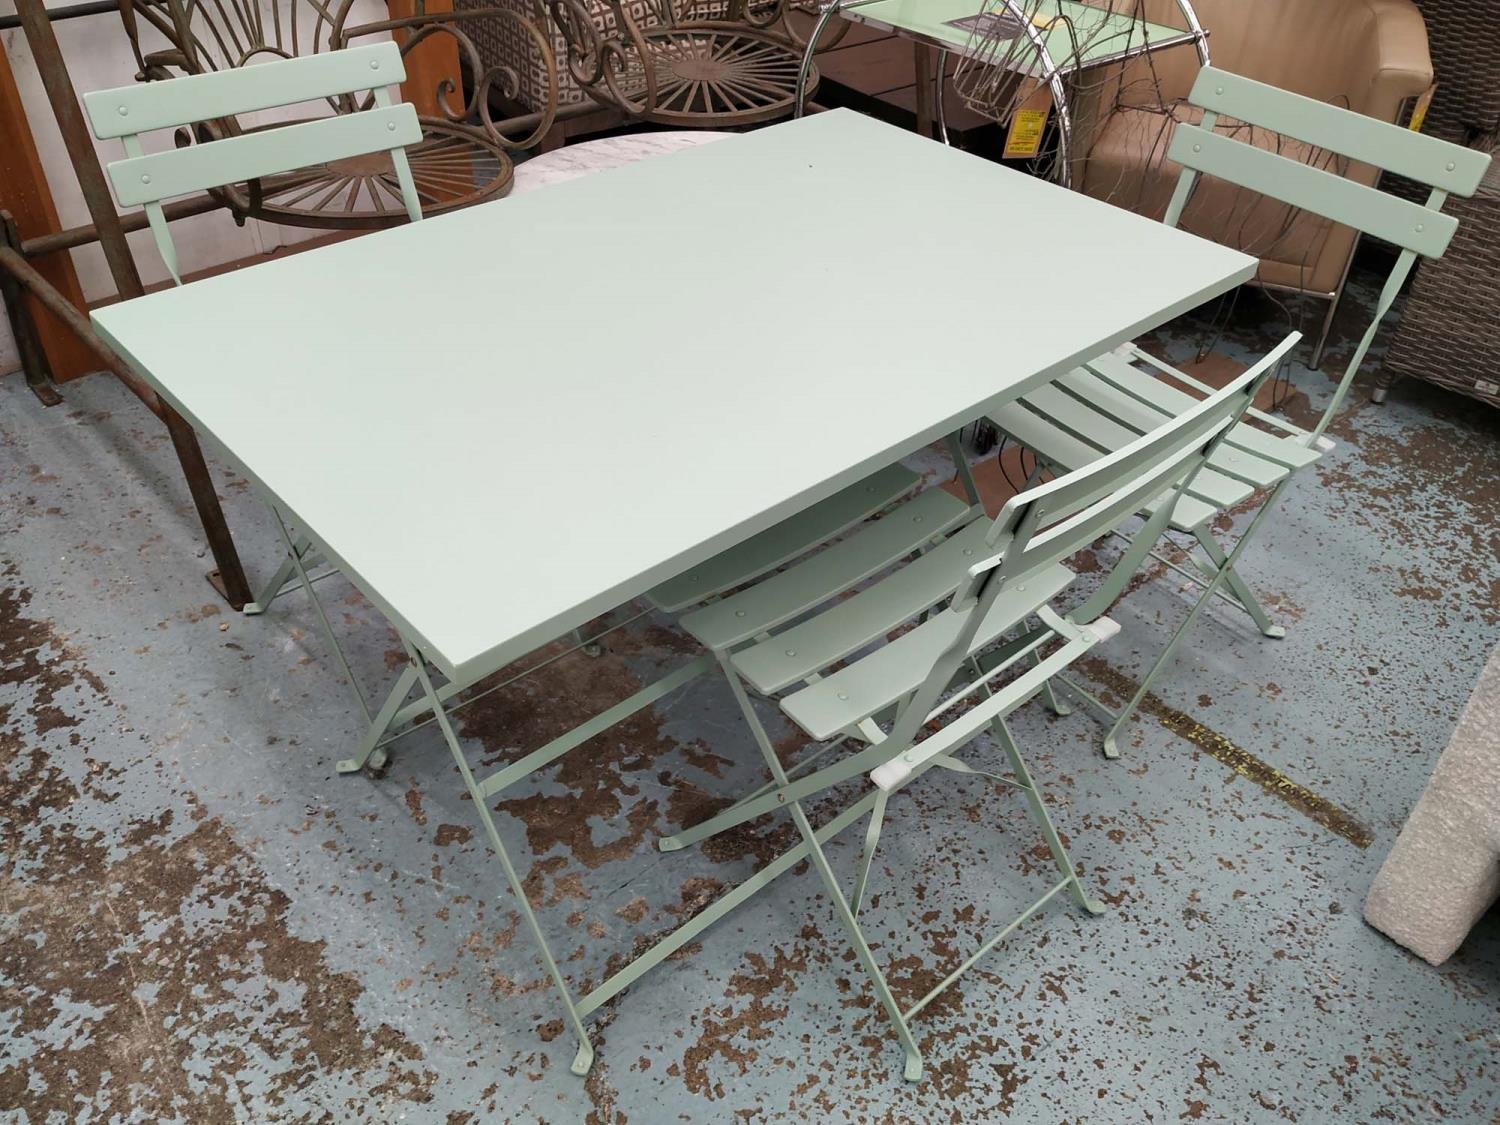 GARDEN SET INCLUDING FOLDING GARDEN TABLE, 70cm x 109cm L, metal painted in a Cambridge blue and